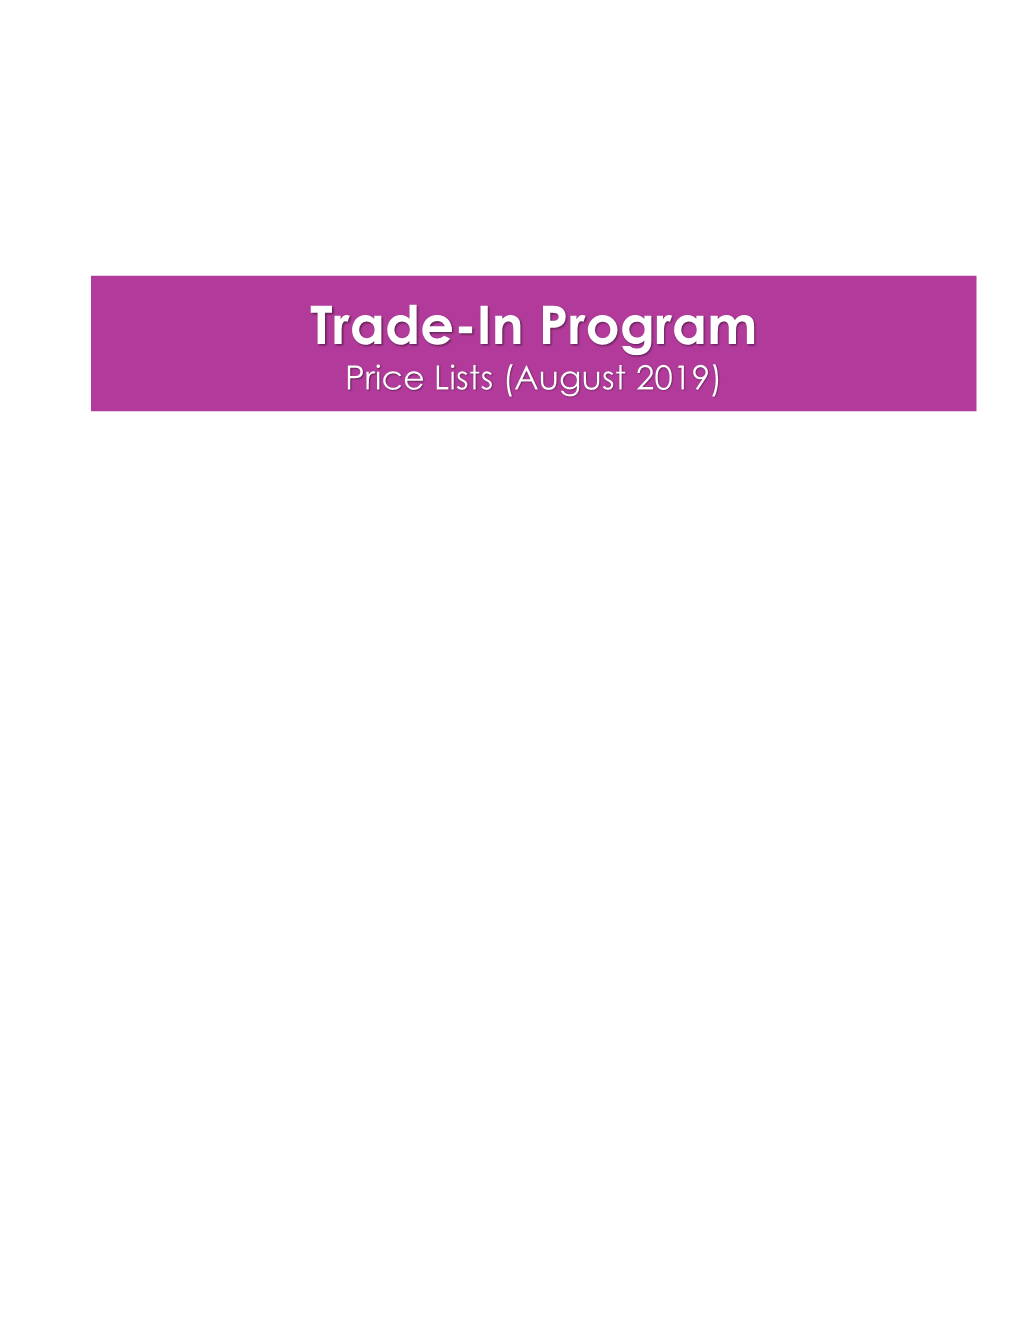 Trade-In Program Price Lists (August 2019) GRADING